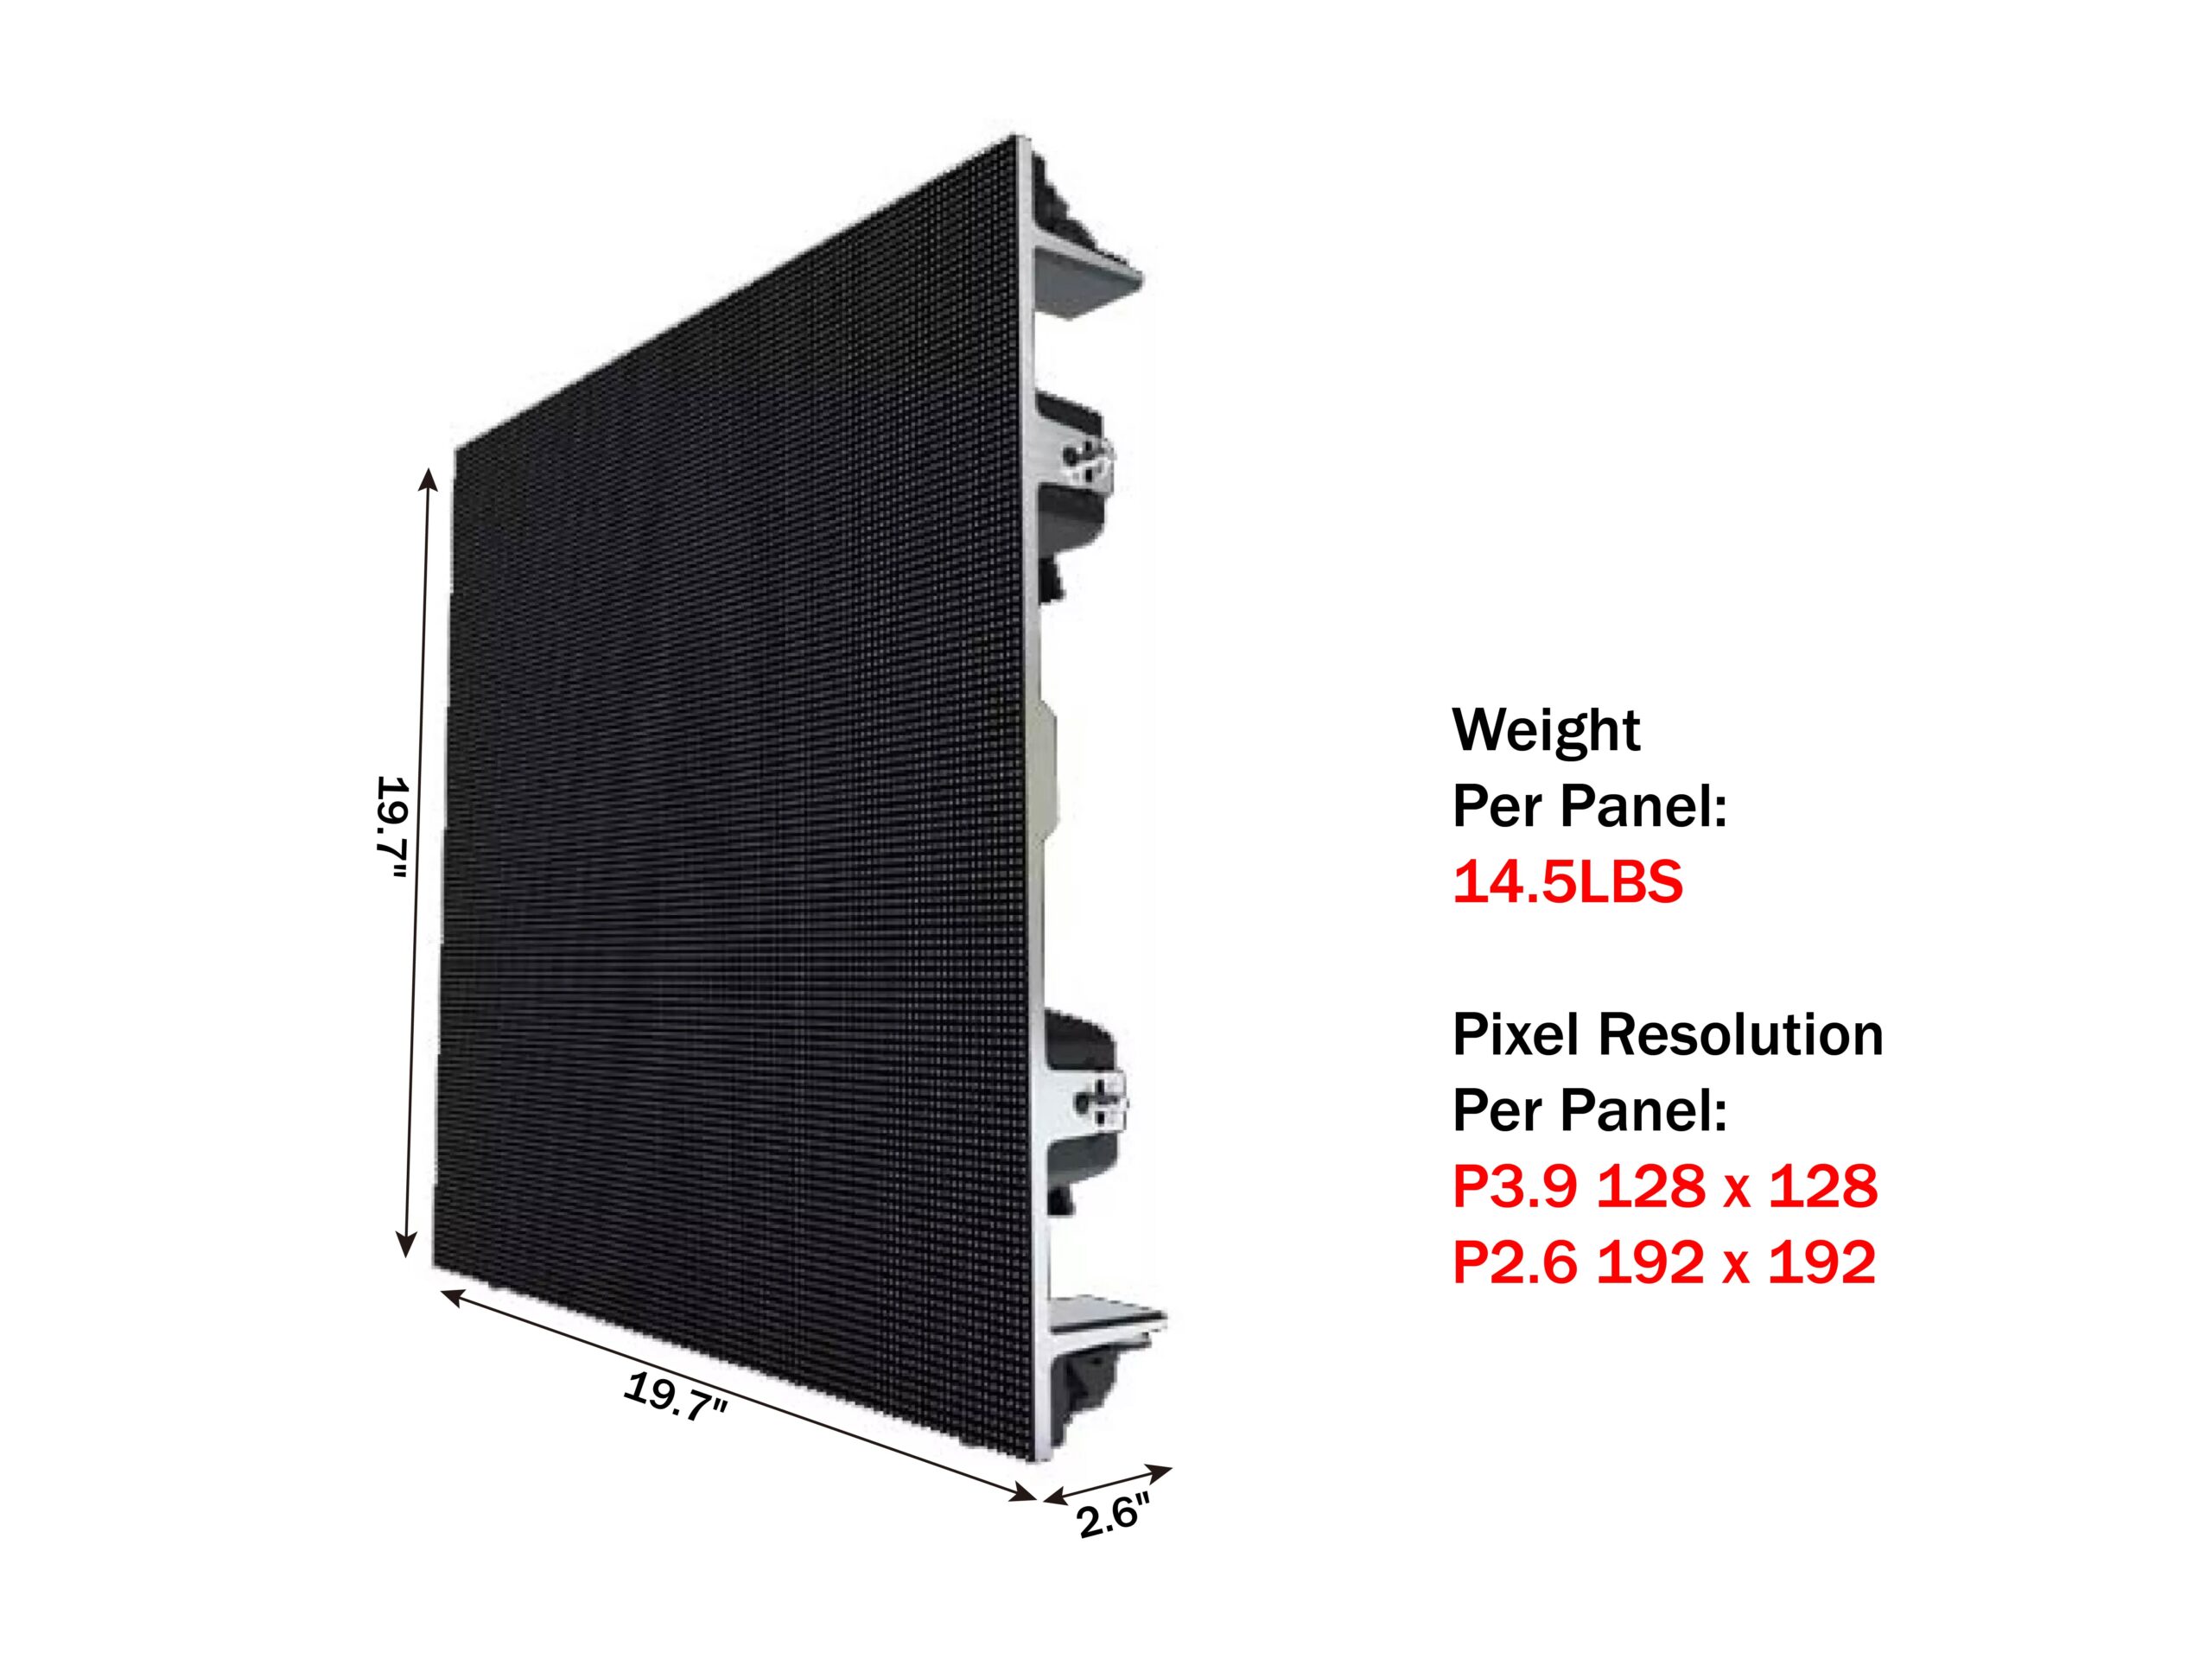 The Size Of LED Video Wall Can Be Customized